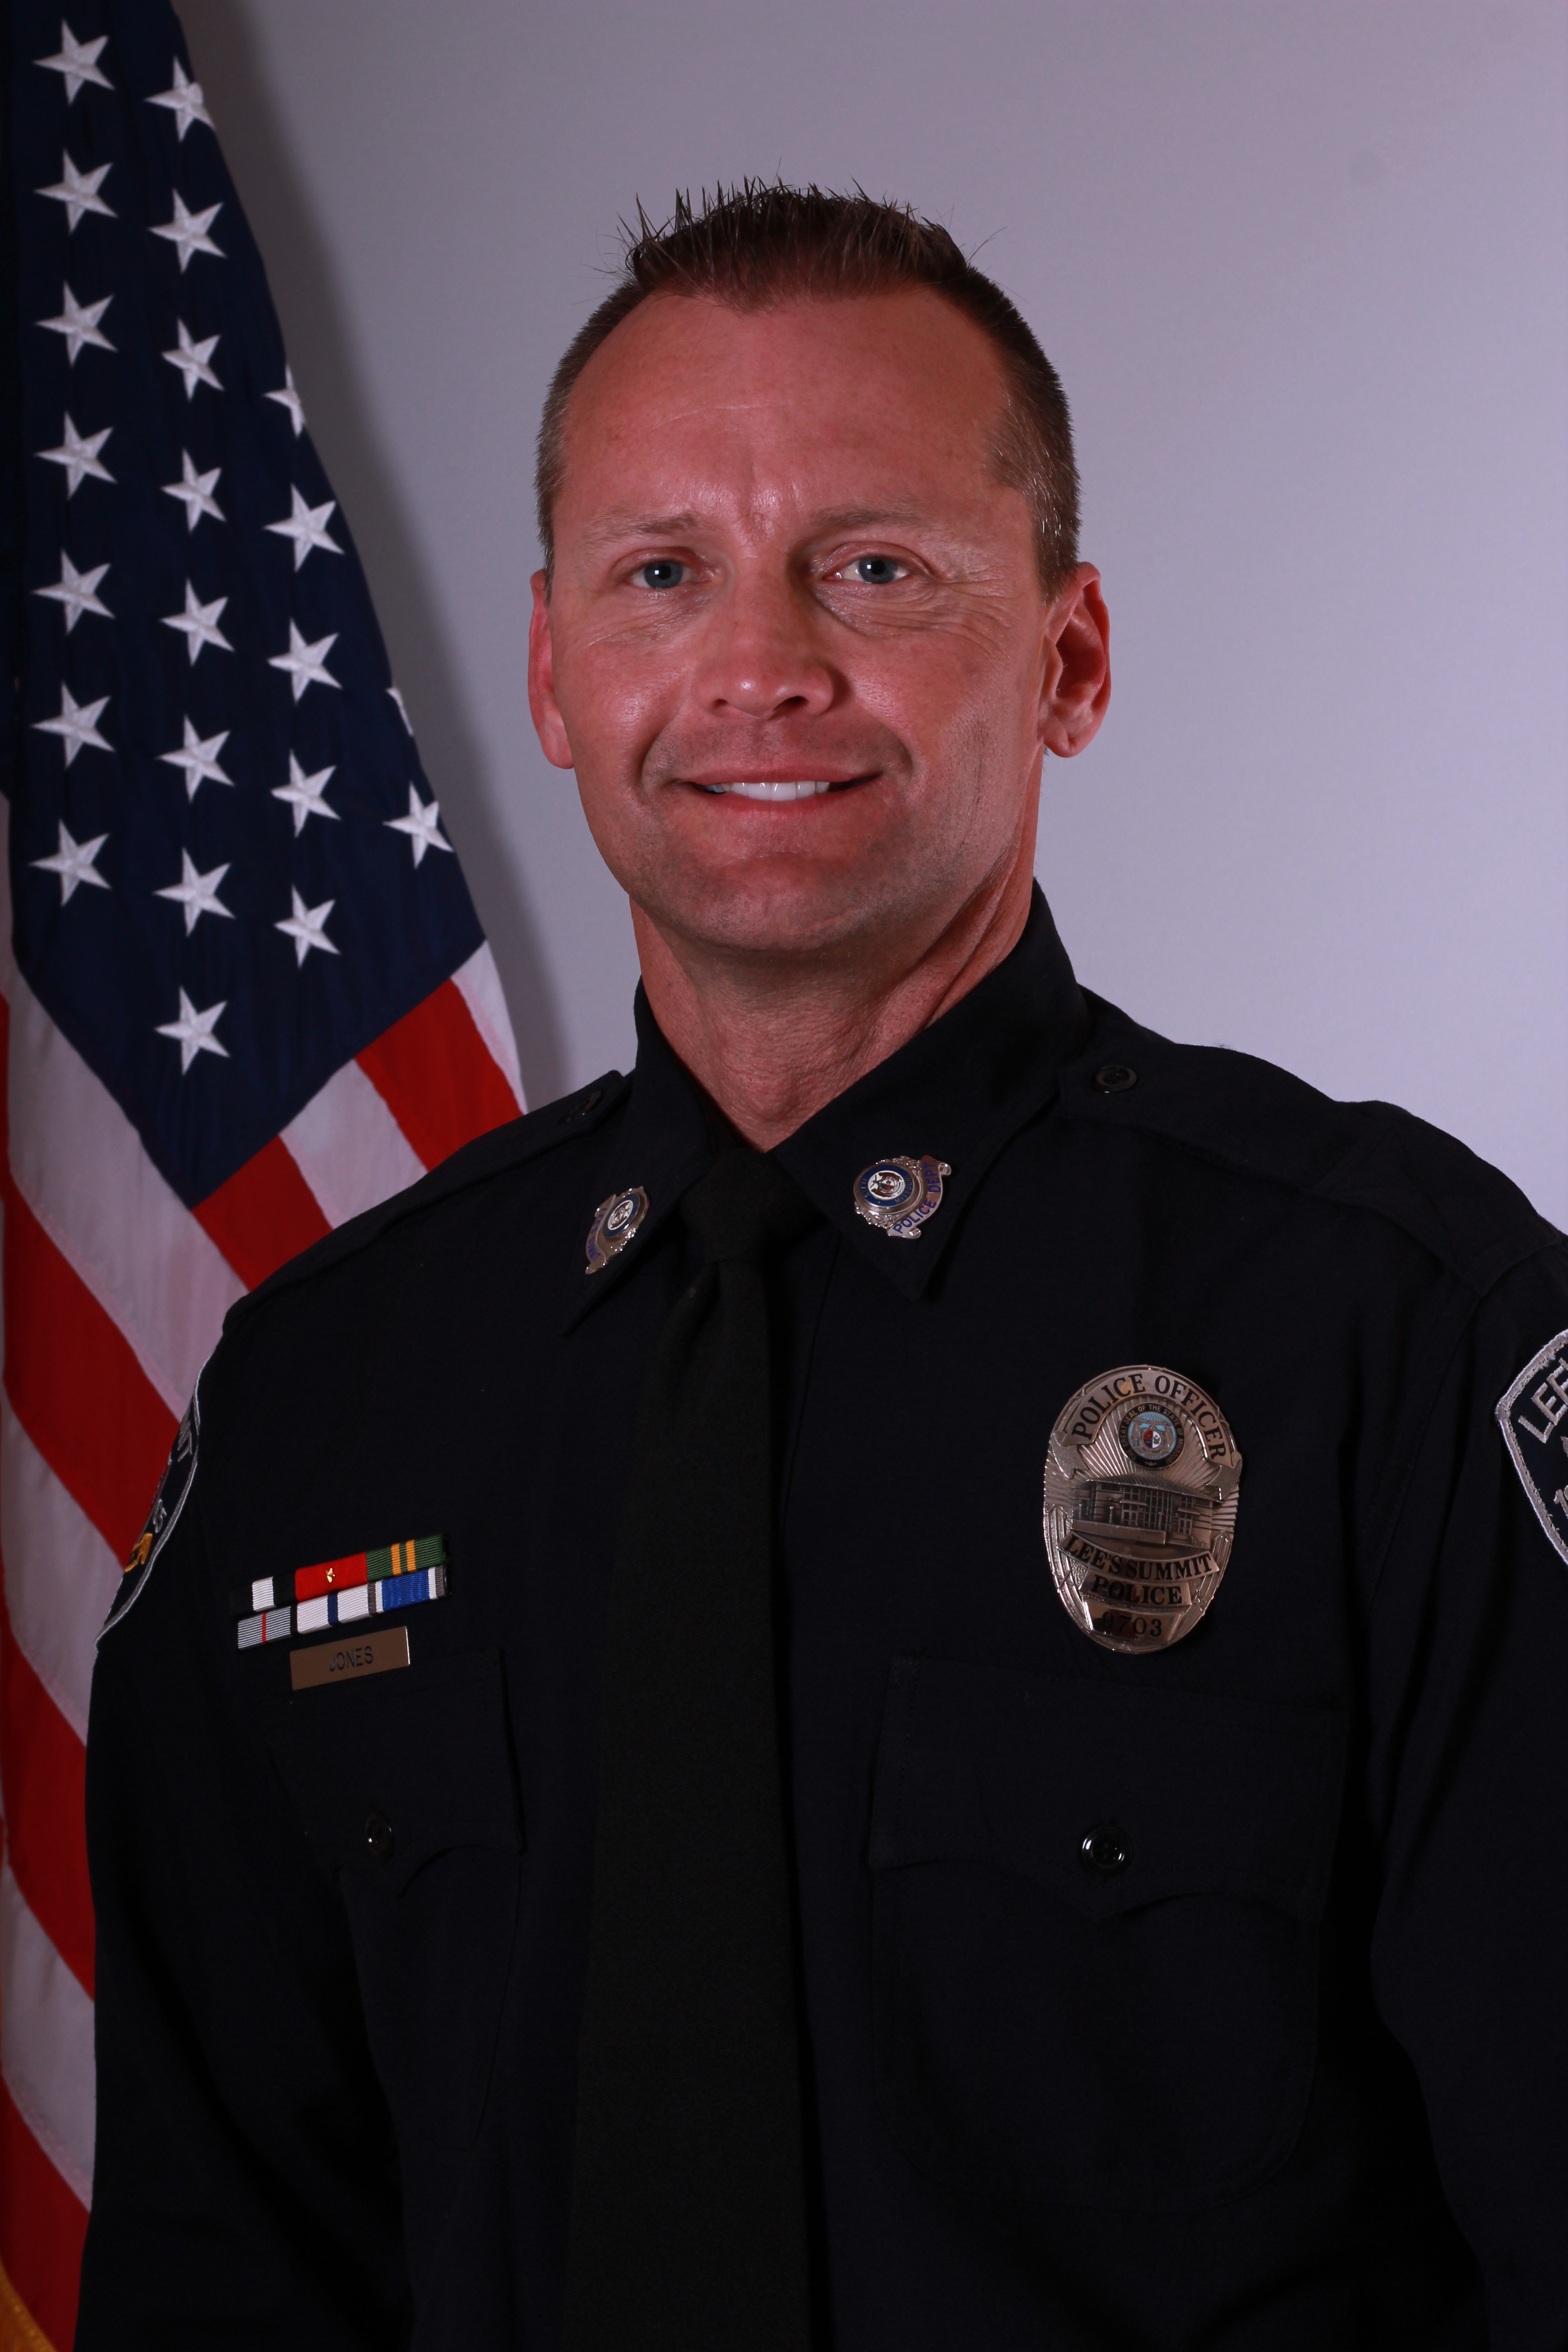 Image of Officer Chris Colon.